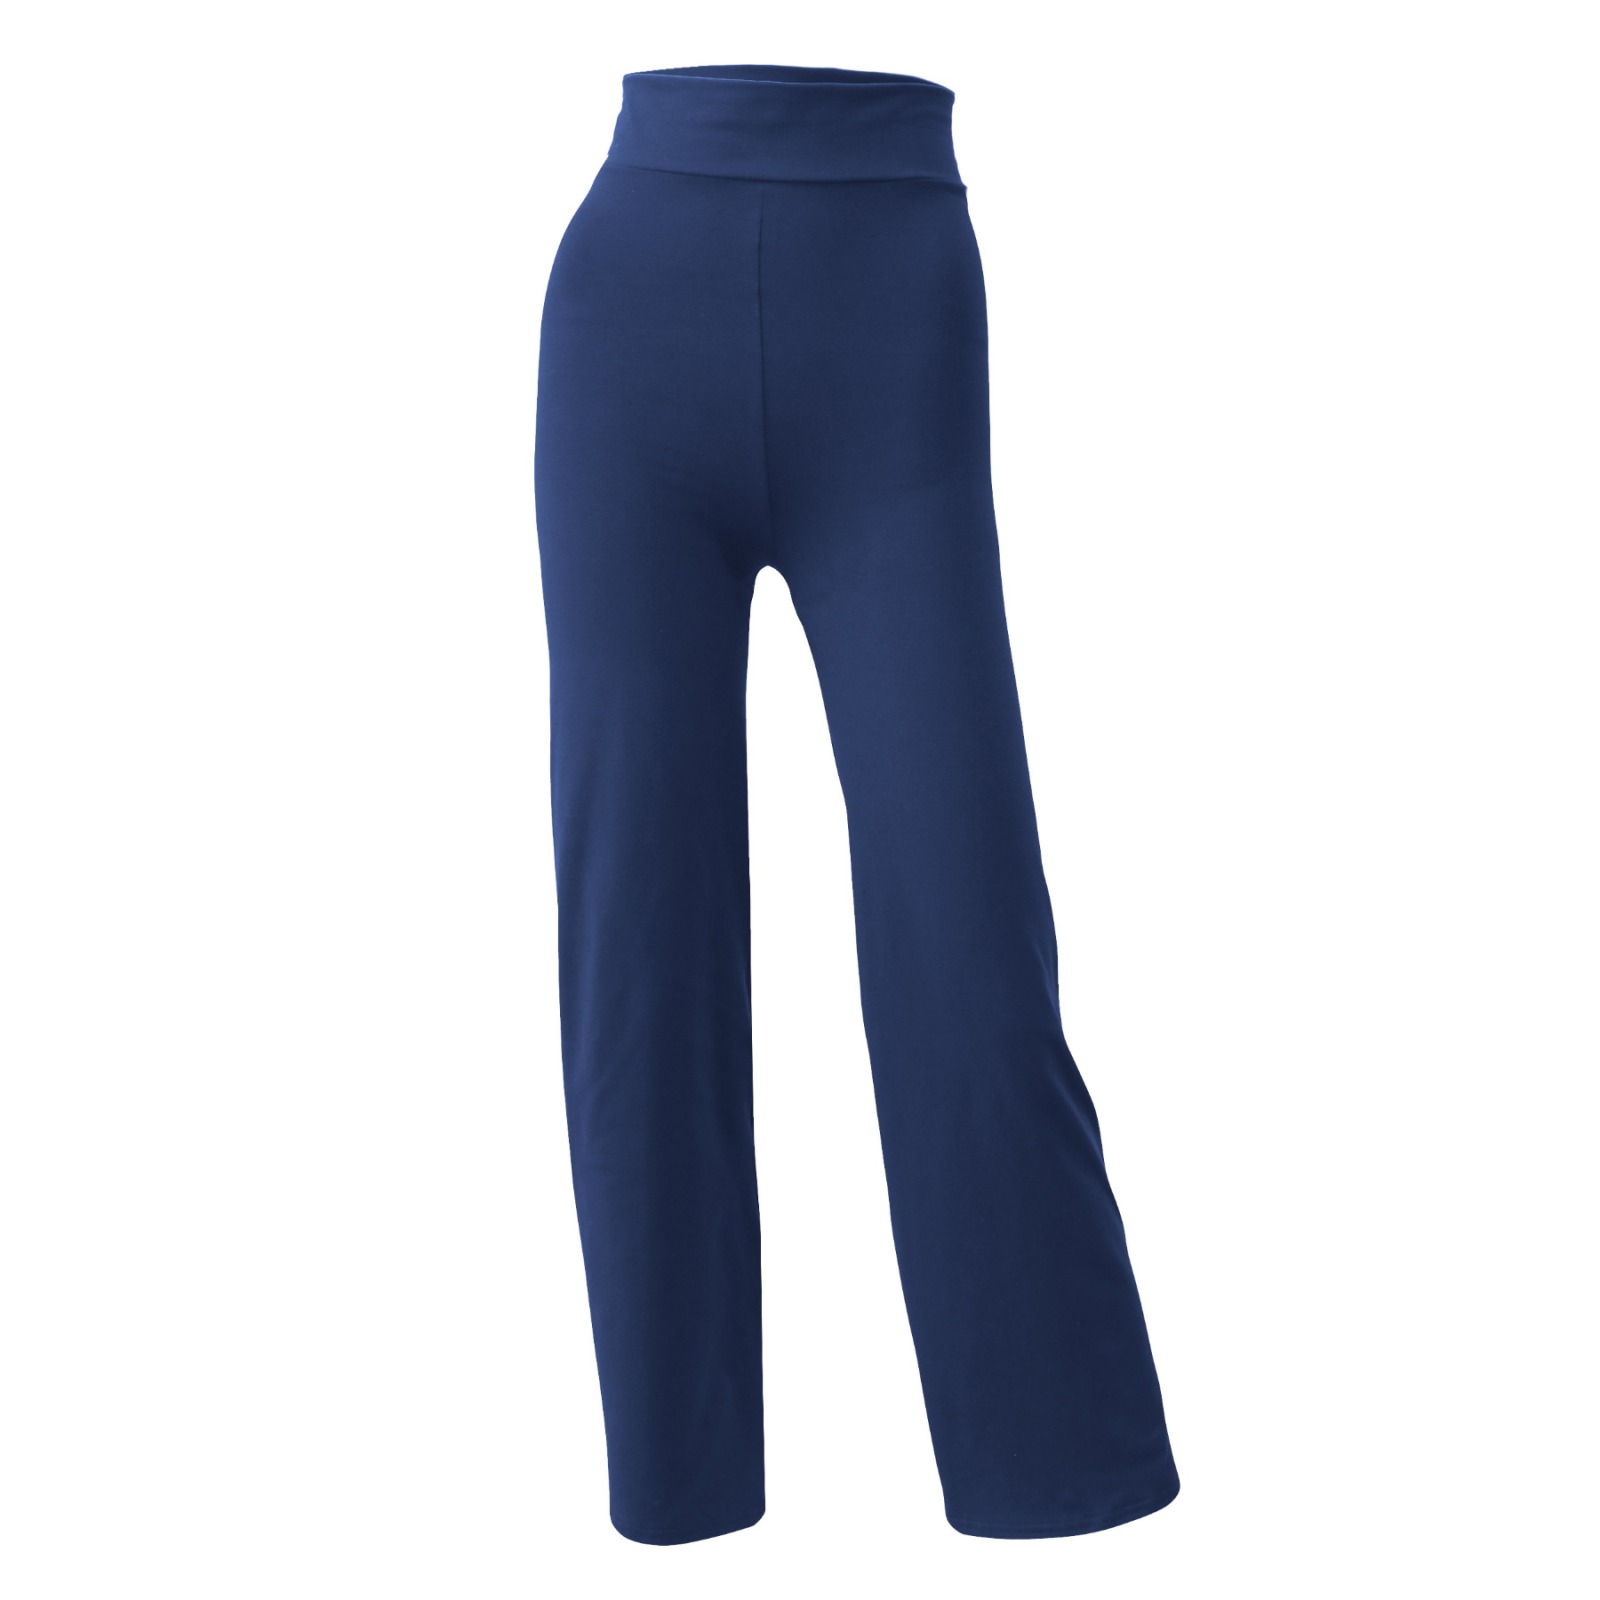 Yoga pants Relaxed Fit indico blue